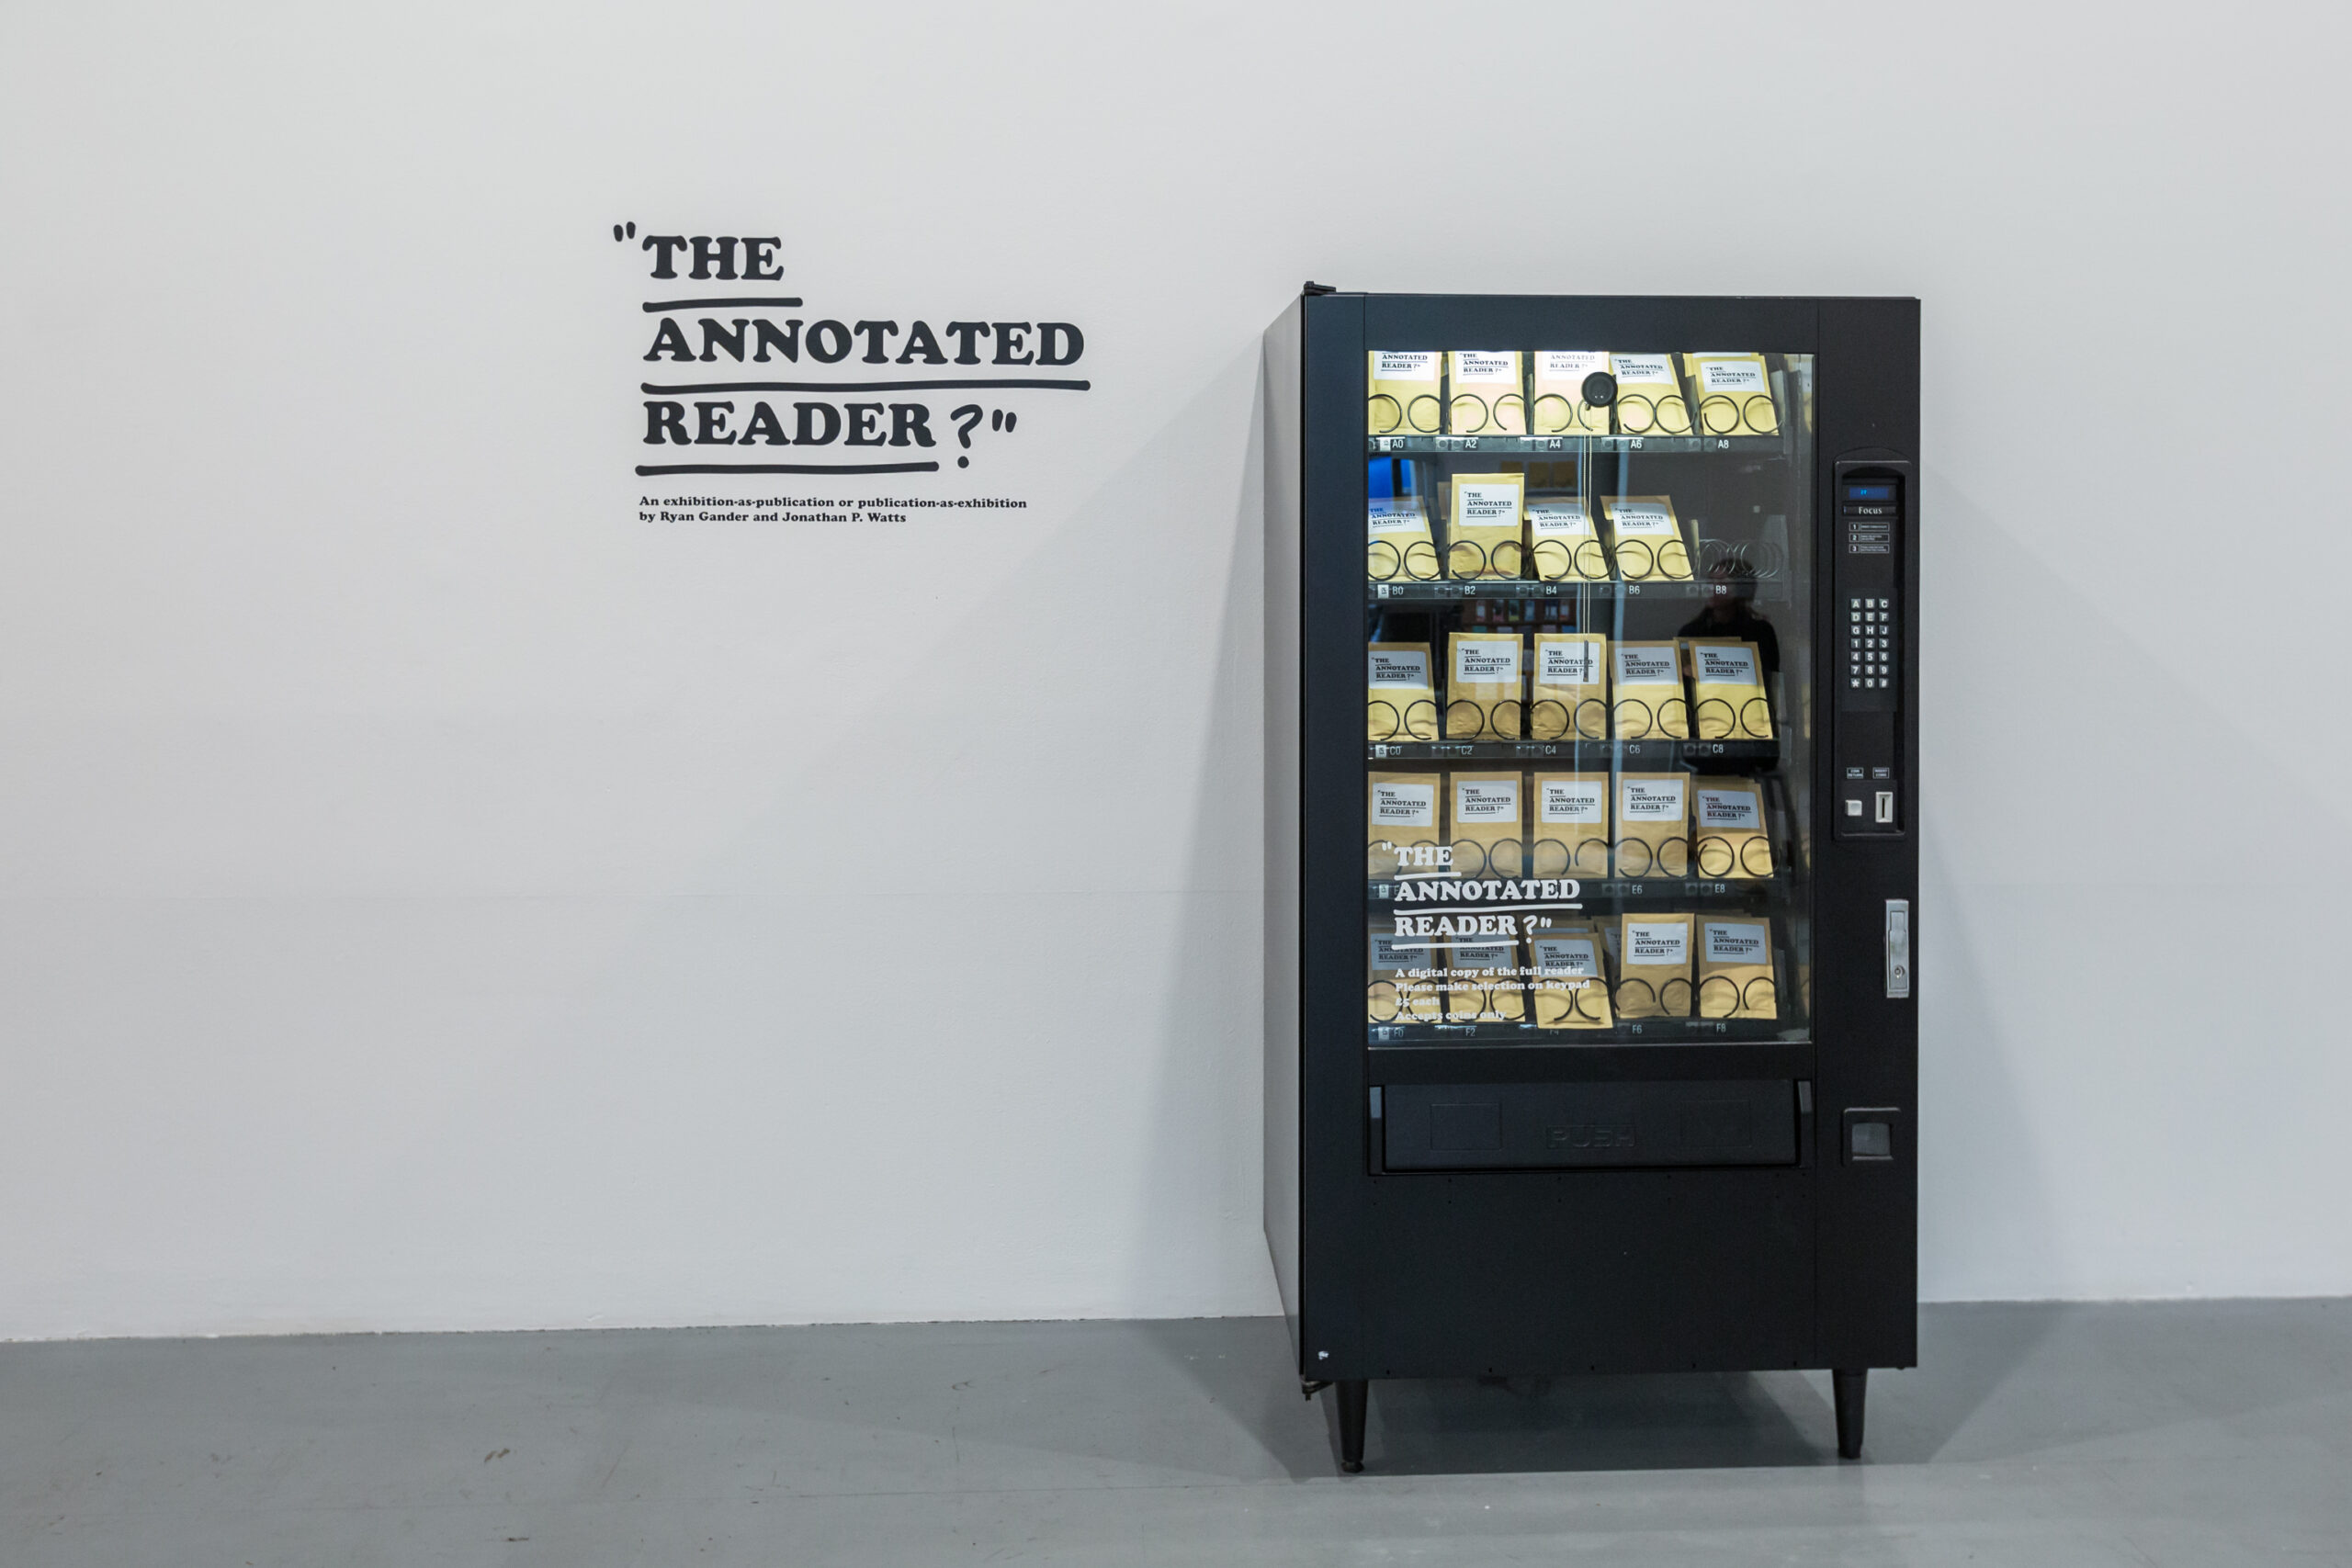 An image of a vending machine filled with books which is The Annotated Reader